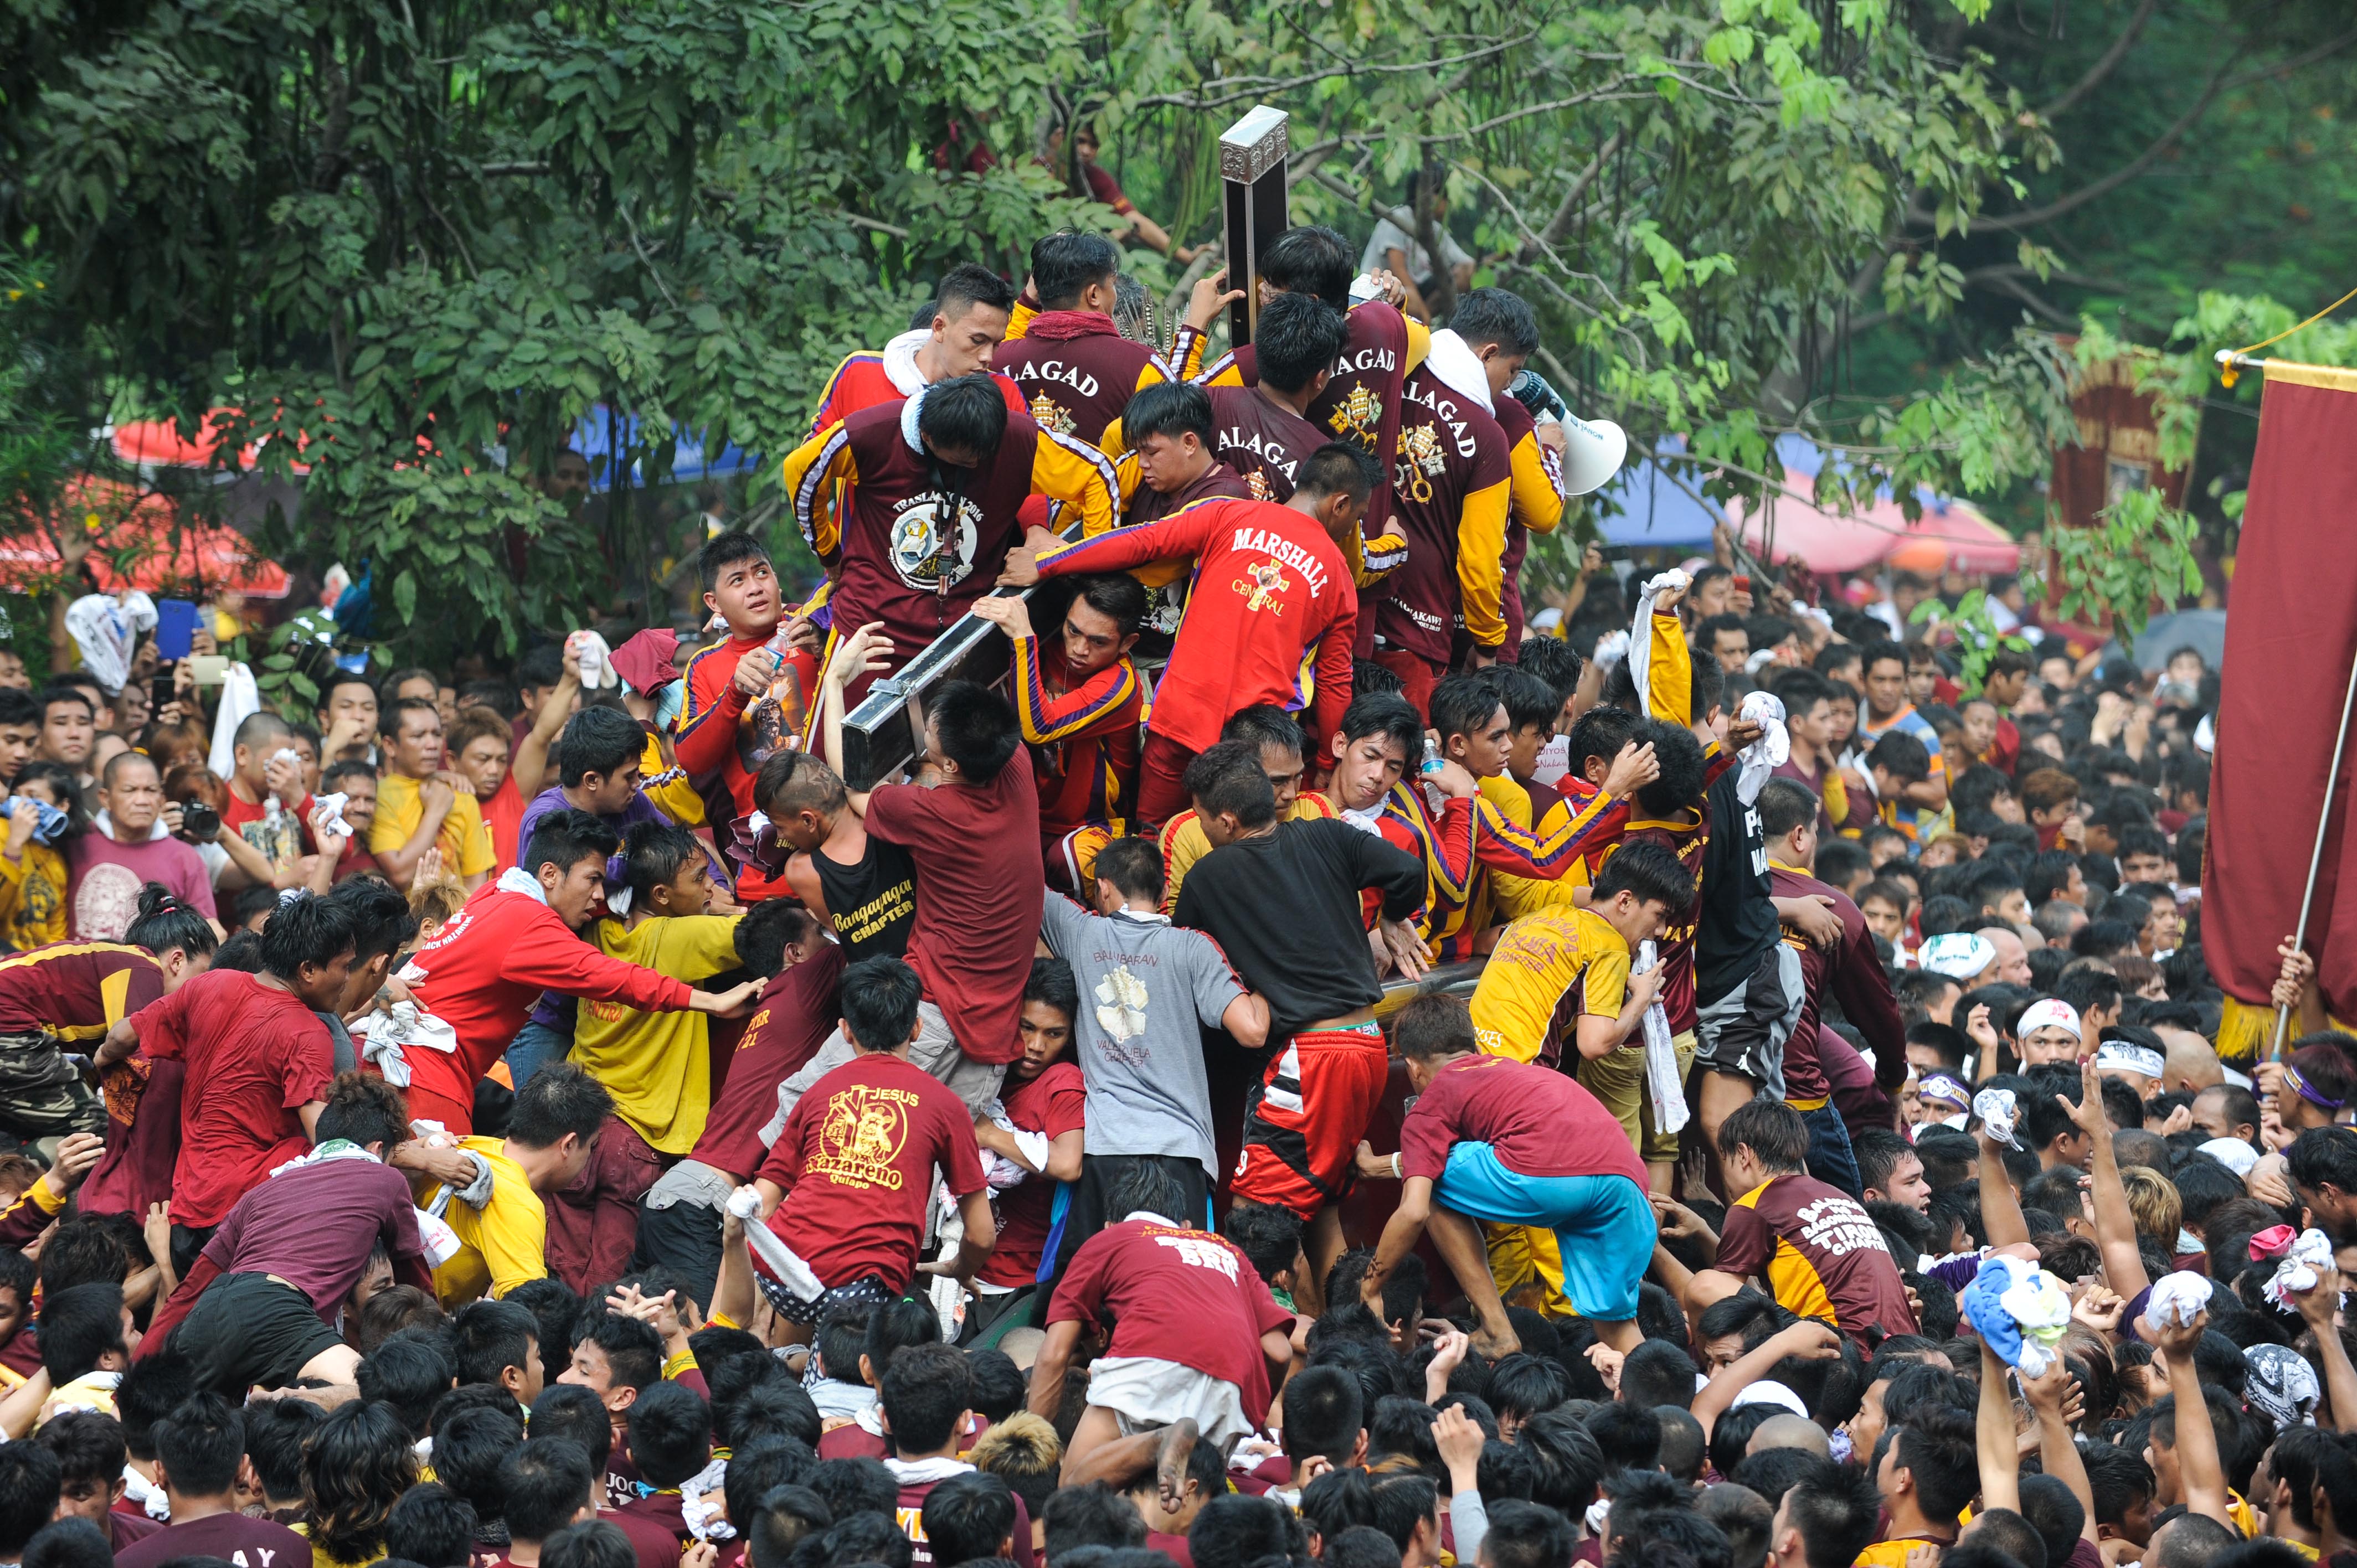 Devotees climb the carriage of the Black Nazarene during the Feast of the Black Nazarene on Jan. 9, 2016, in Manila (Dondi Tawatao—Getty Images)